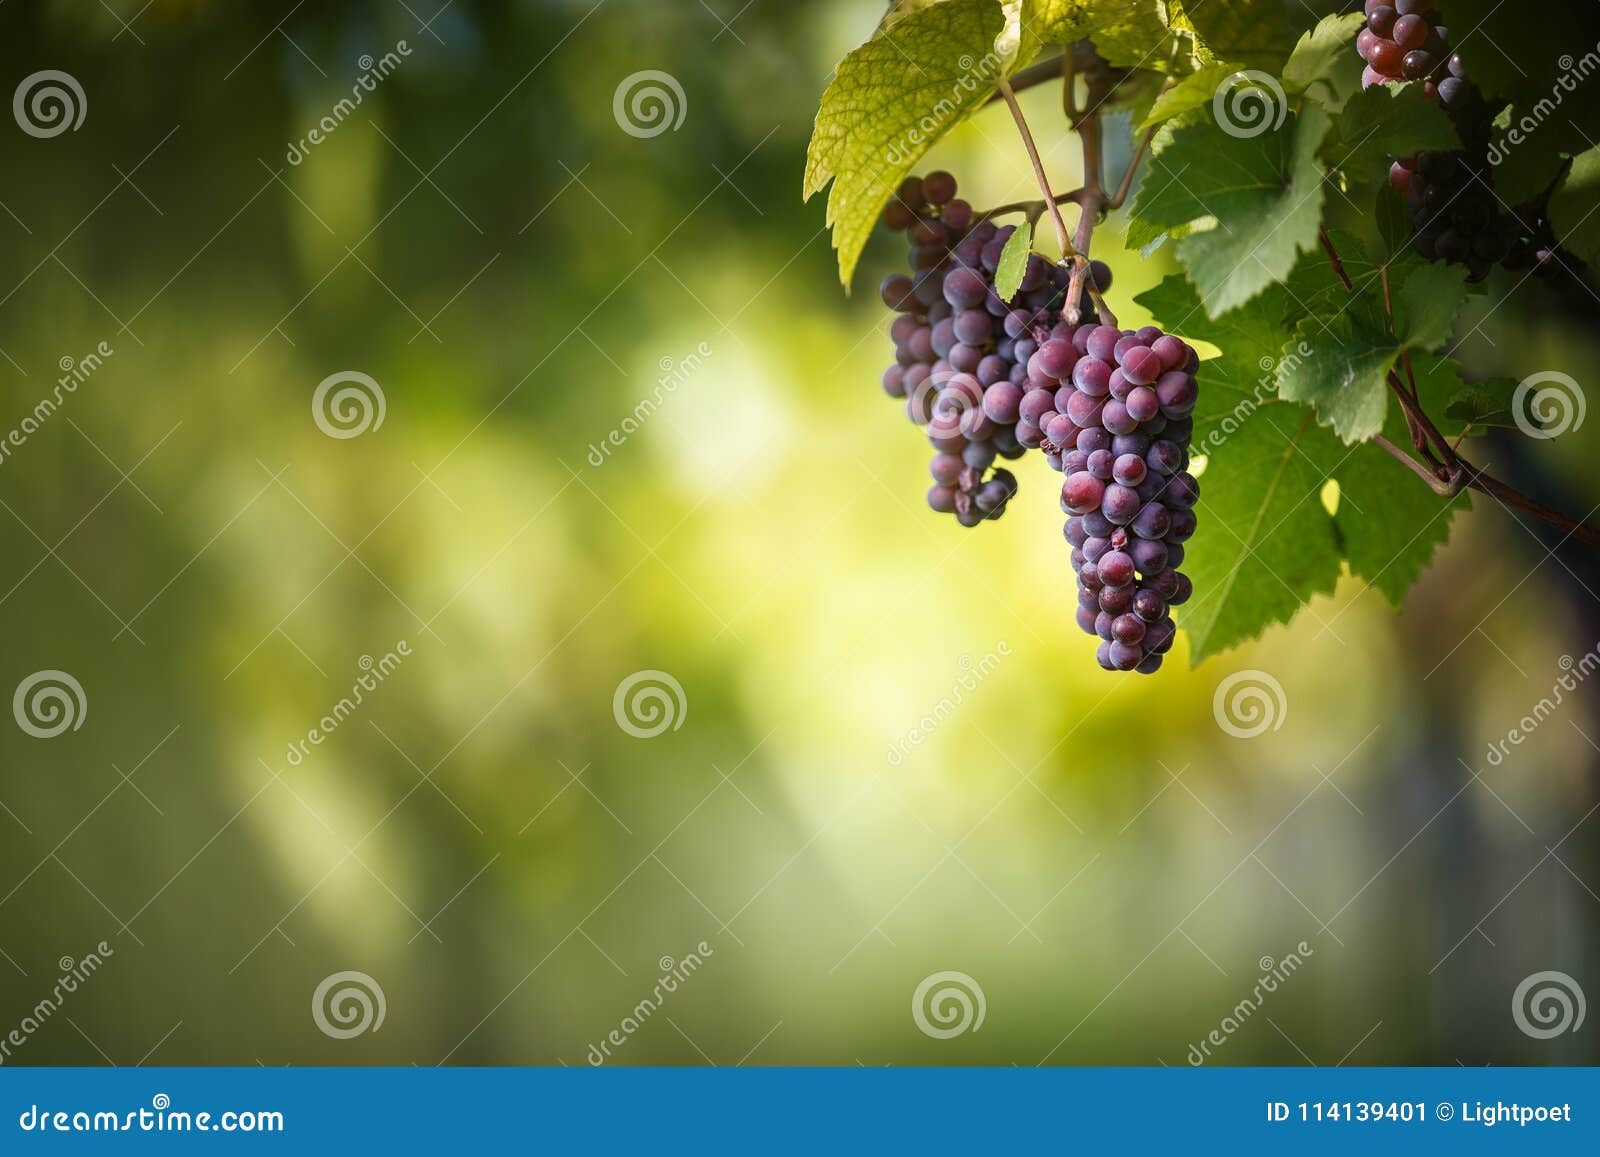 large bunches of red wine grapes hang from an old vine